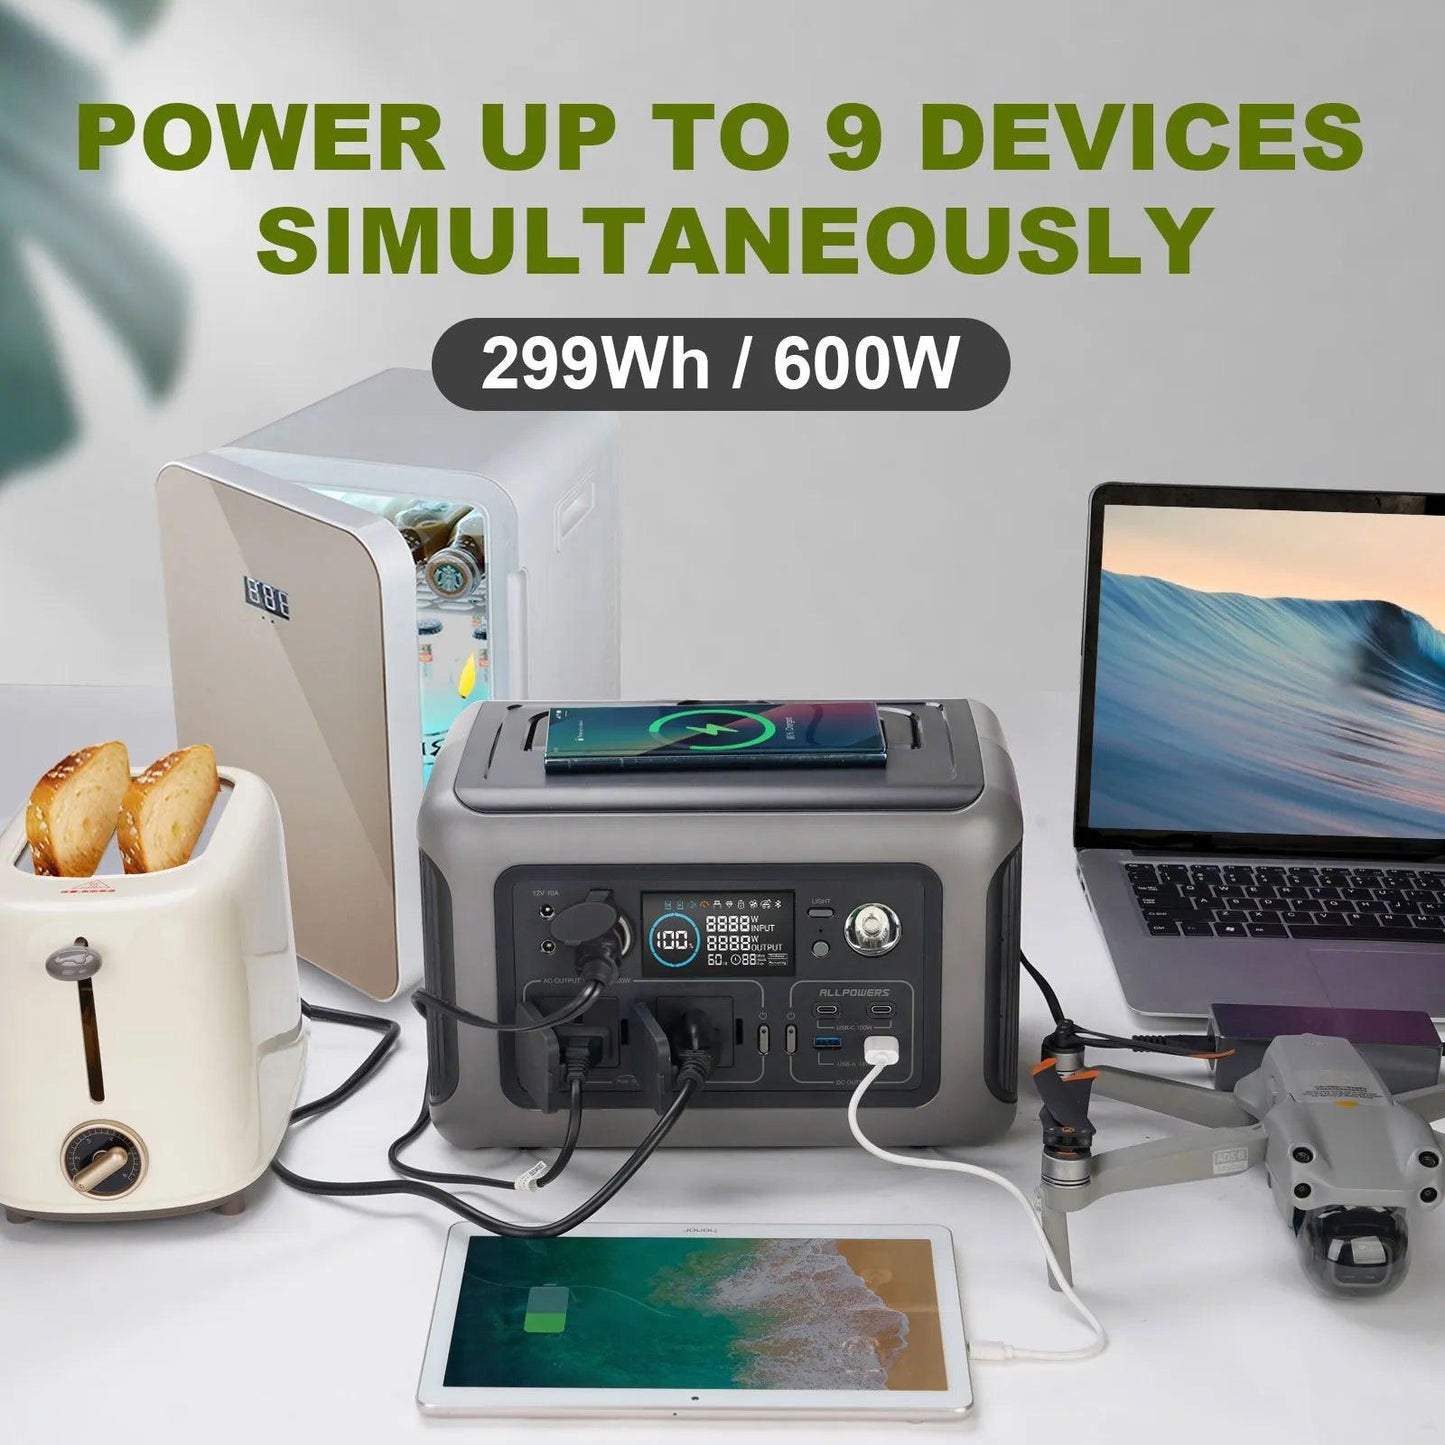 ALLPOWERS R600 Portable Power Station 600W - Inverted Powers